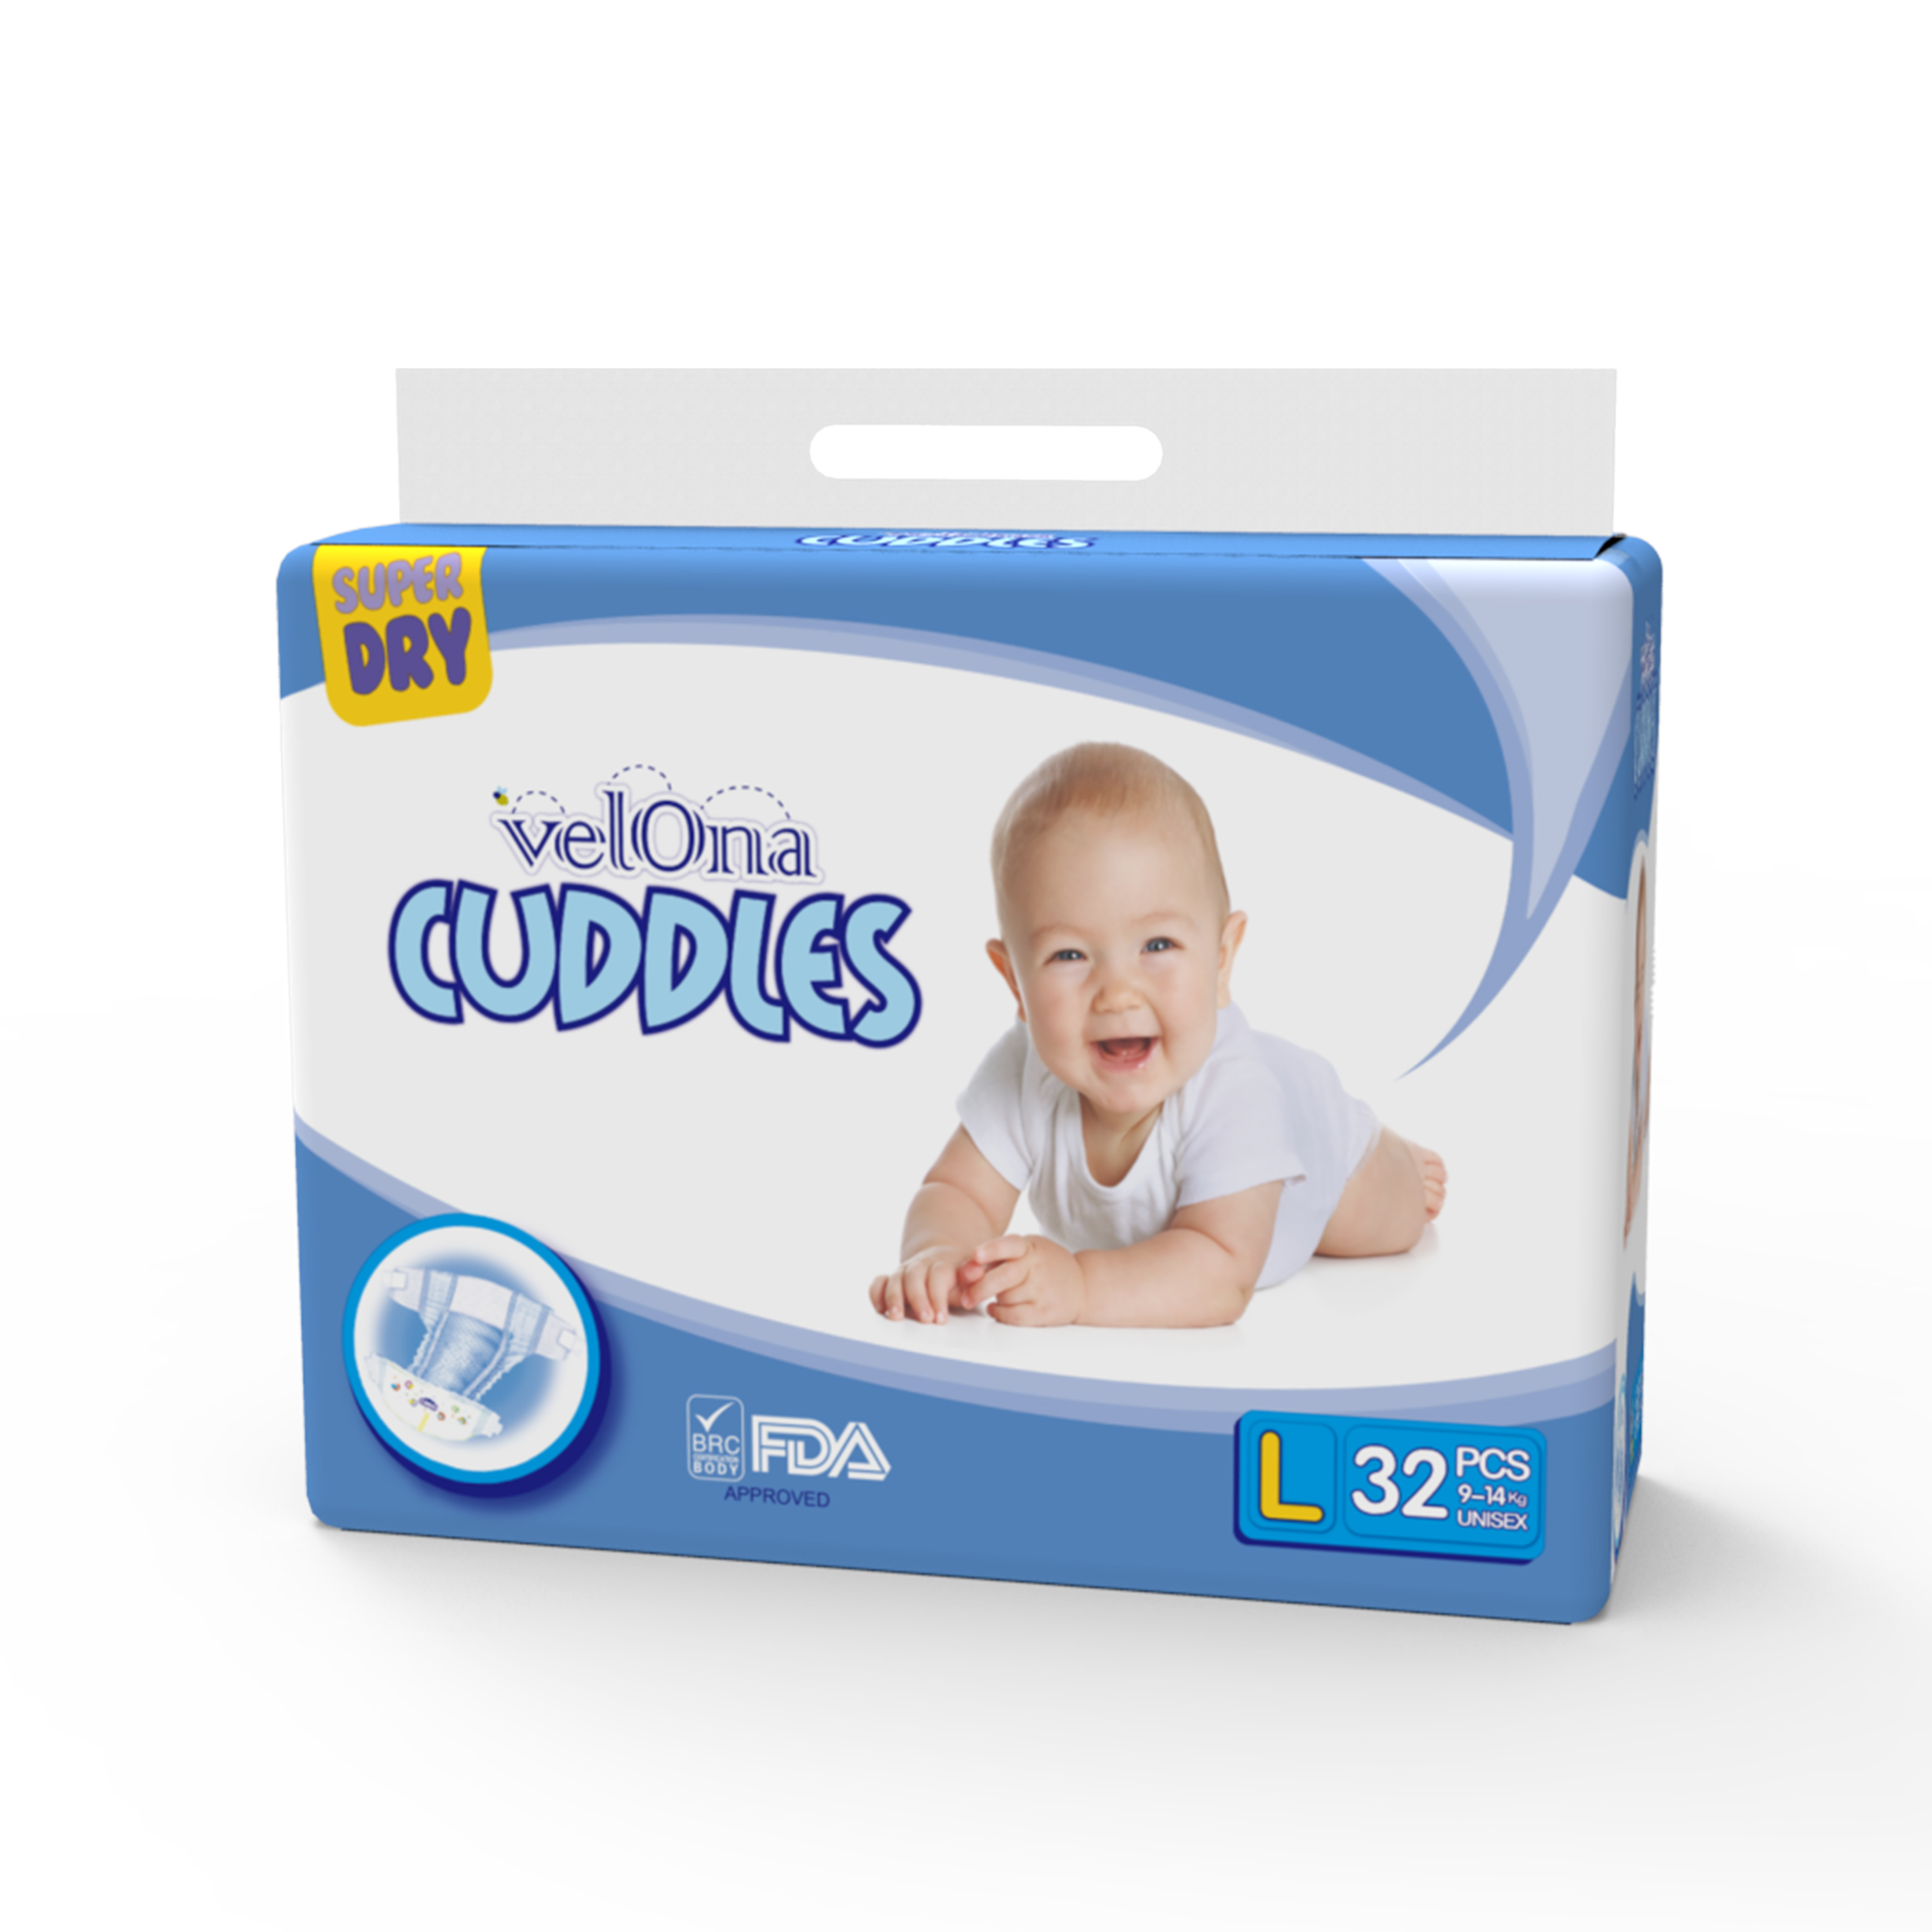 100% Original Factory China Velona Cuddles Baby Panty Diaper Baby Diapers sa Wholesale Prices